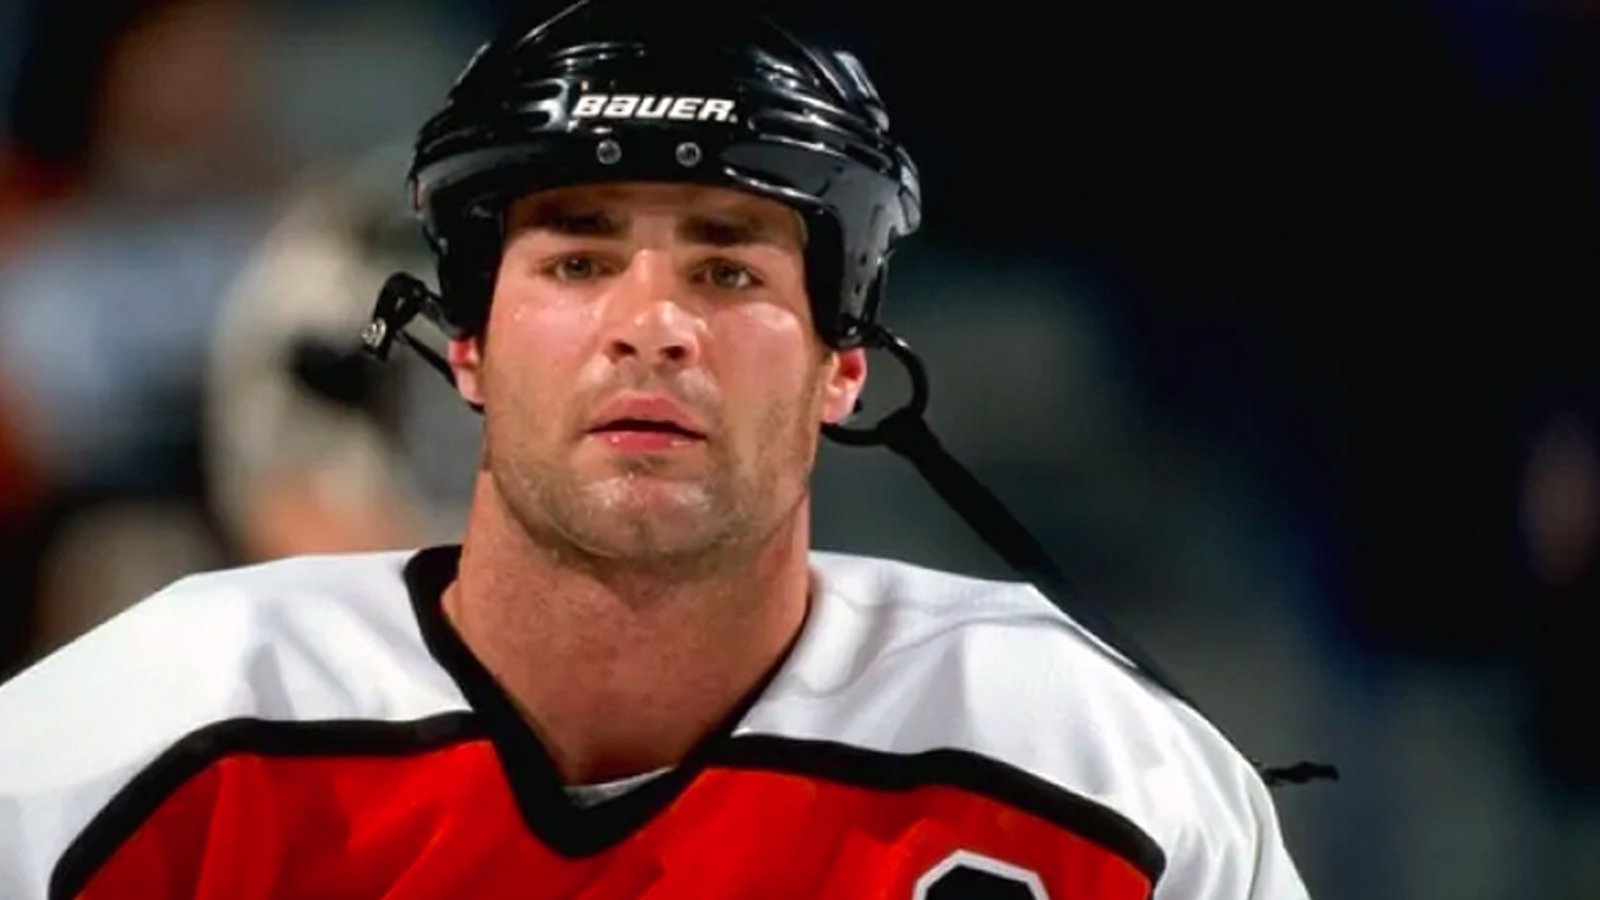 Lindros owns the Penguins and scores a goal without a stick